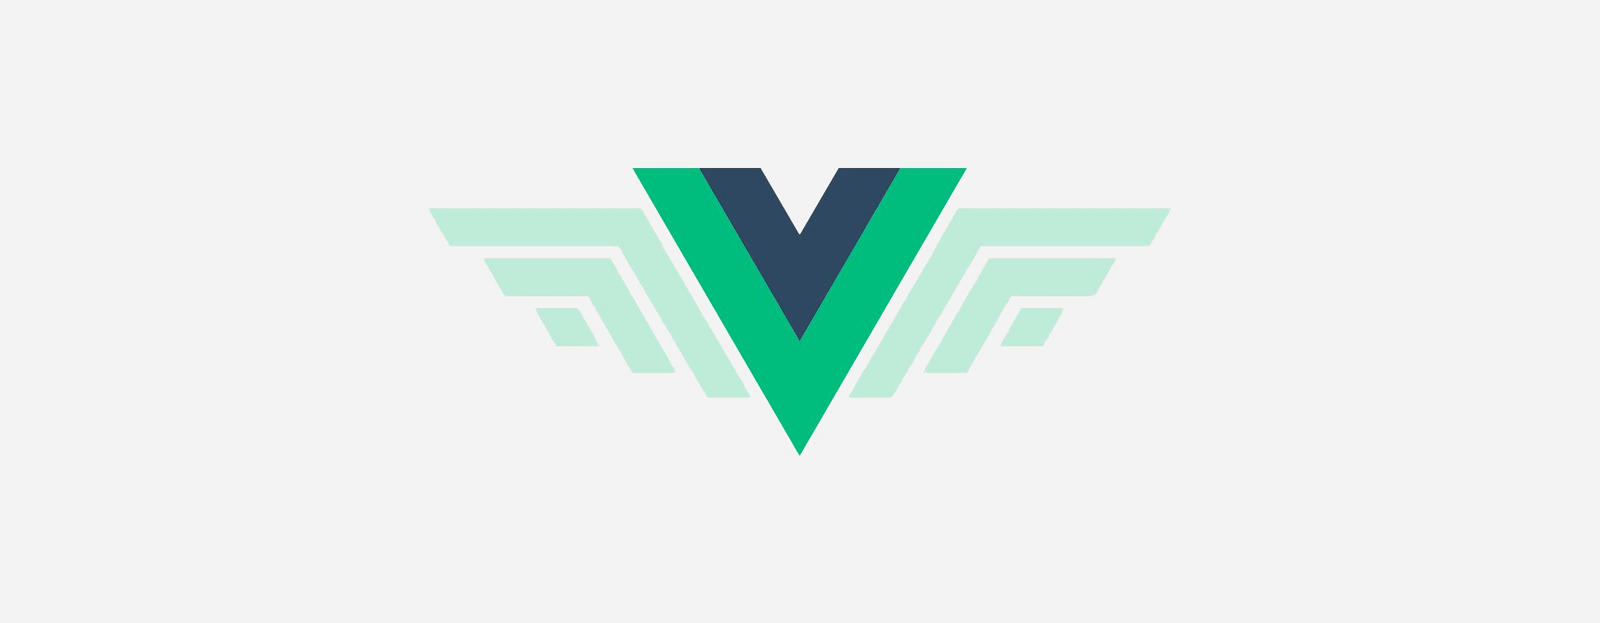 Top Vue Packages for Checking Network Status Checkboxes & Radio Buttons